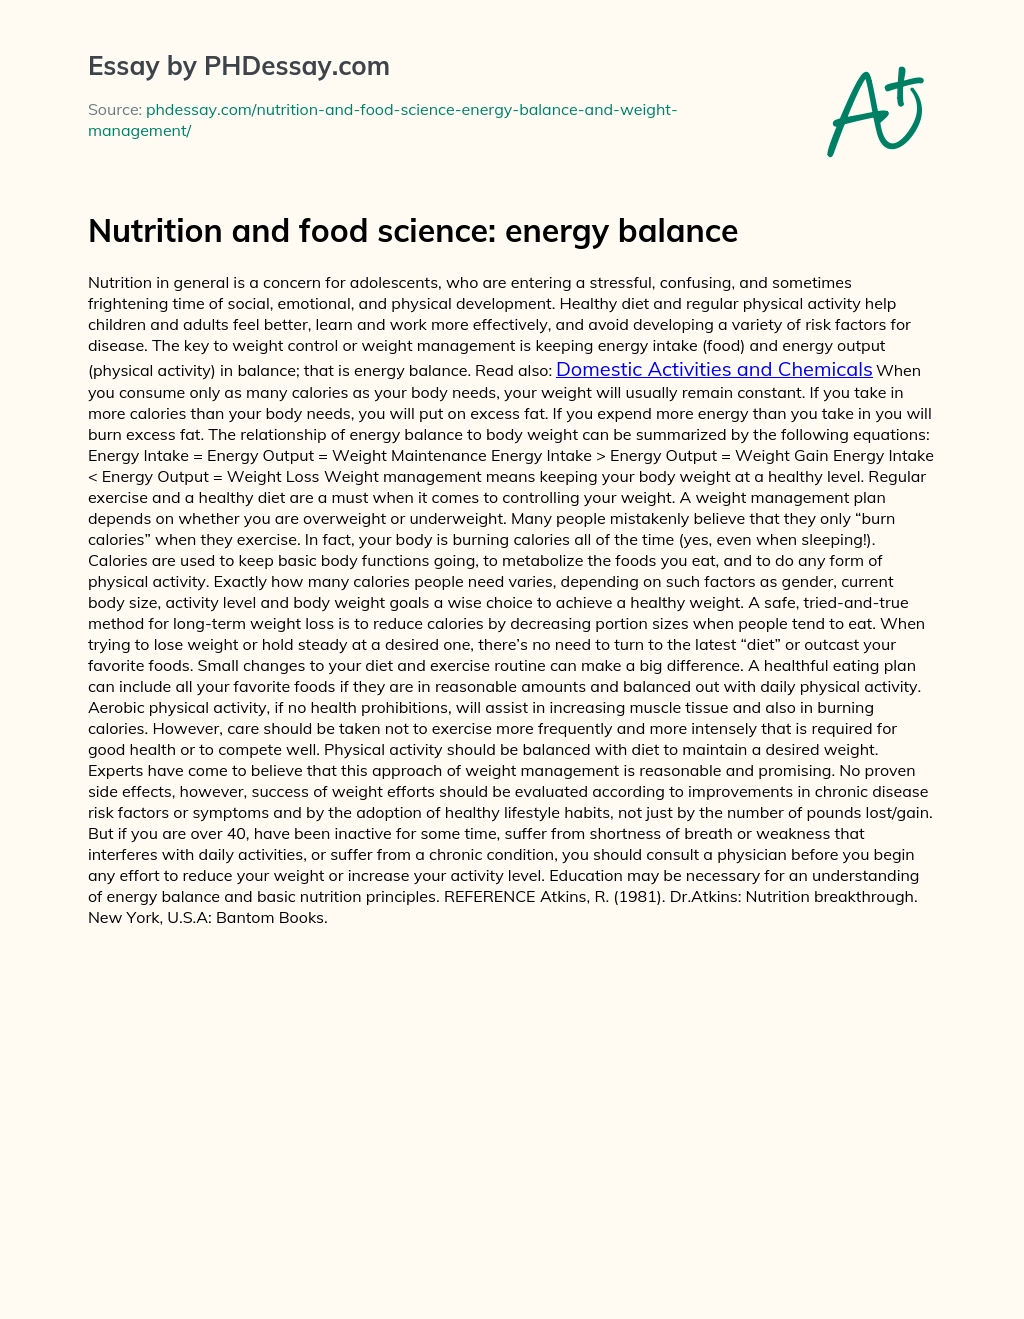 Nutrition And Food Science: Energy Balance essay